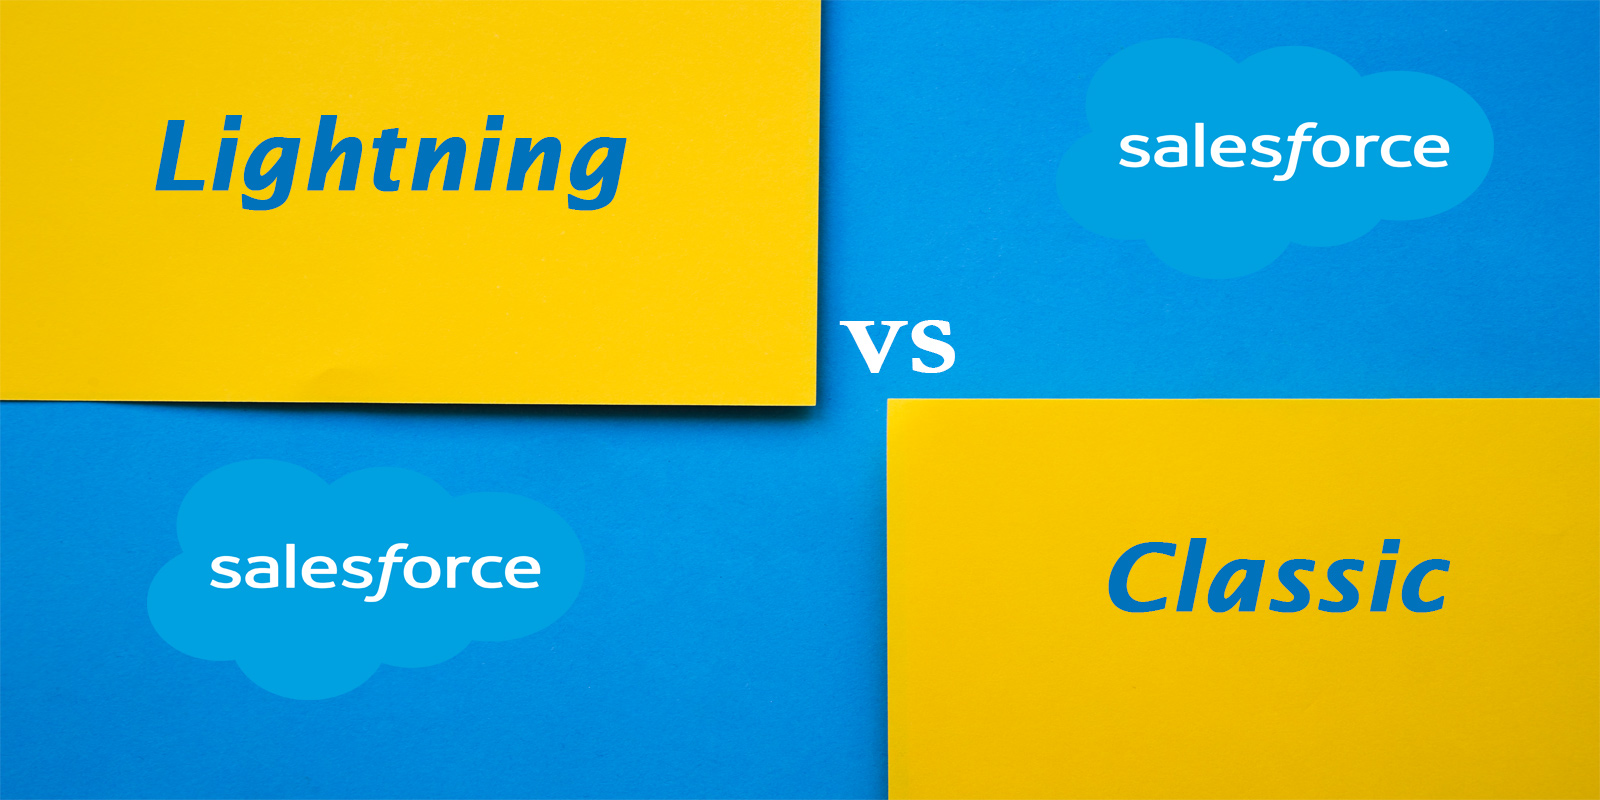 Salesforce Lightning and Classic